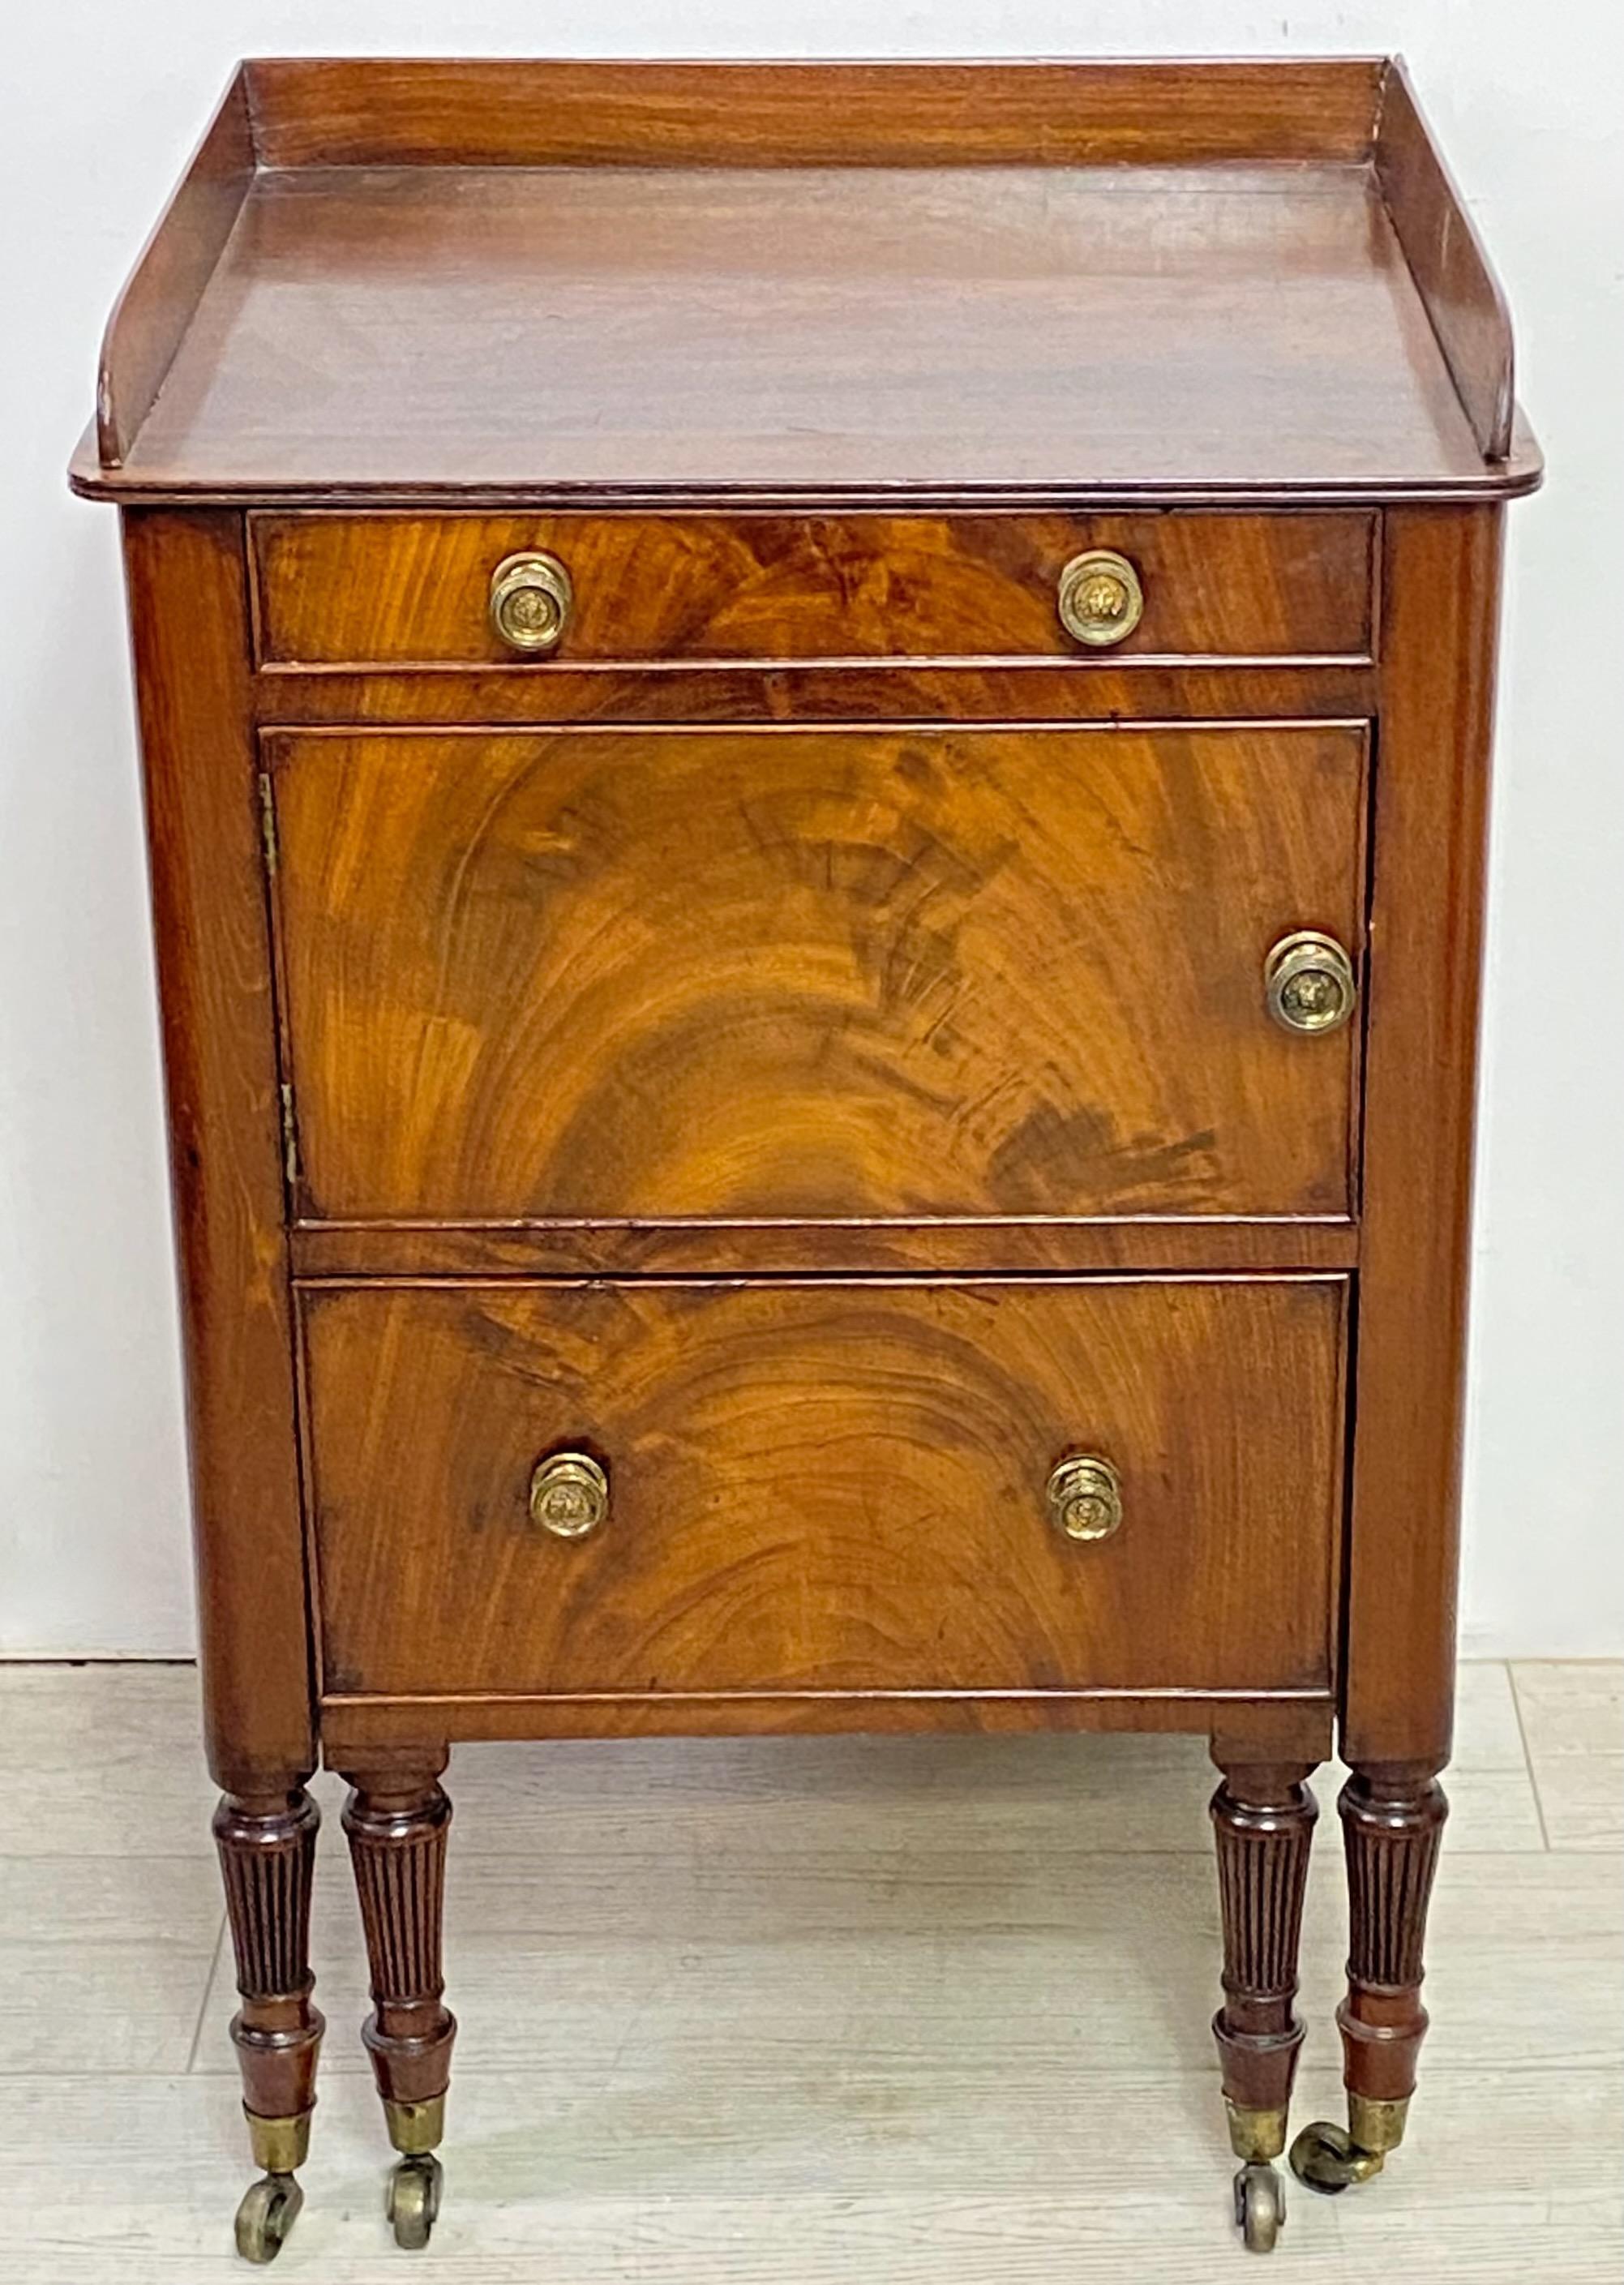 Exceptional solid mahogany bedside cabinet with flame mahogany veneer on the drawer and door fronts. Having its original finish and hardware, the commode drawer now converted to a shallow drawer.    
High quality and in very good condition.
England,